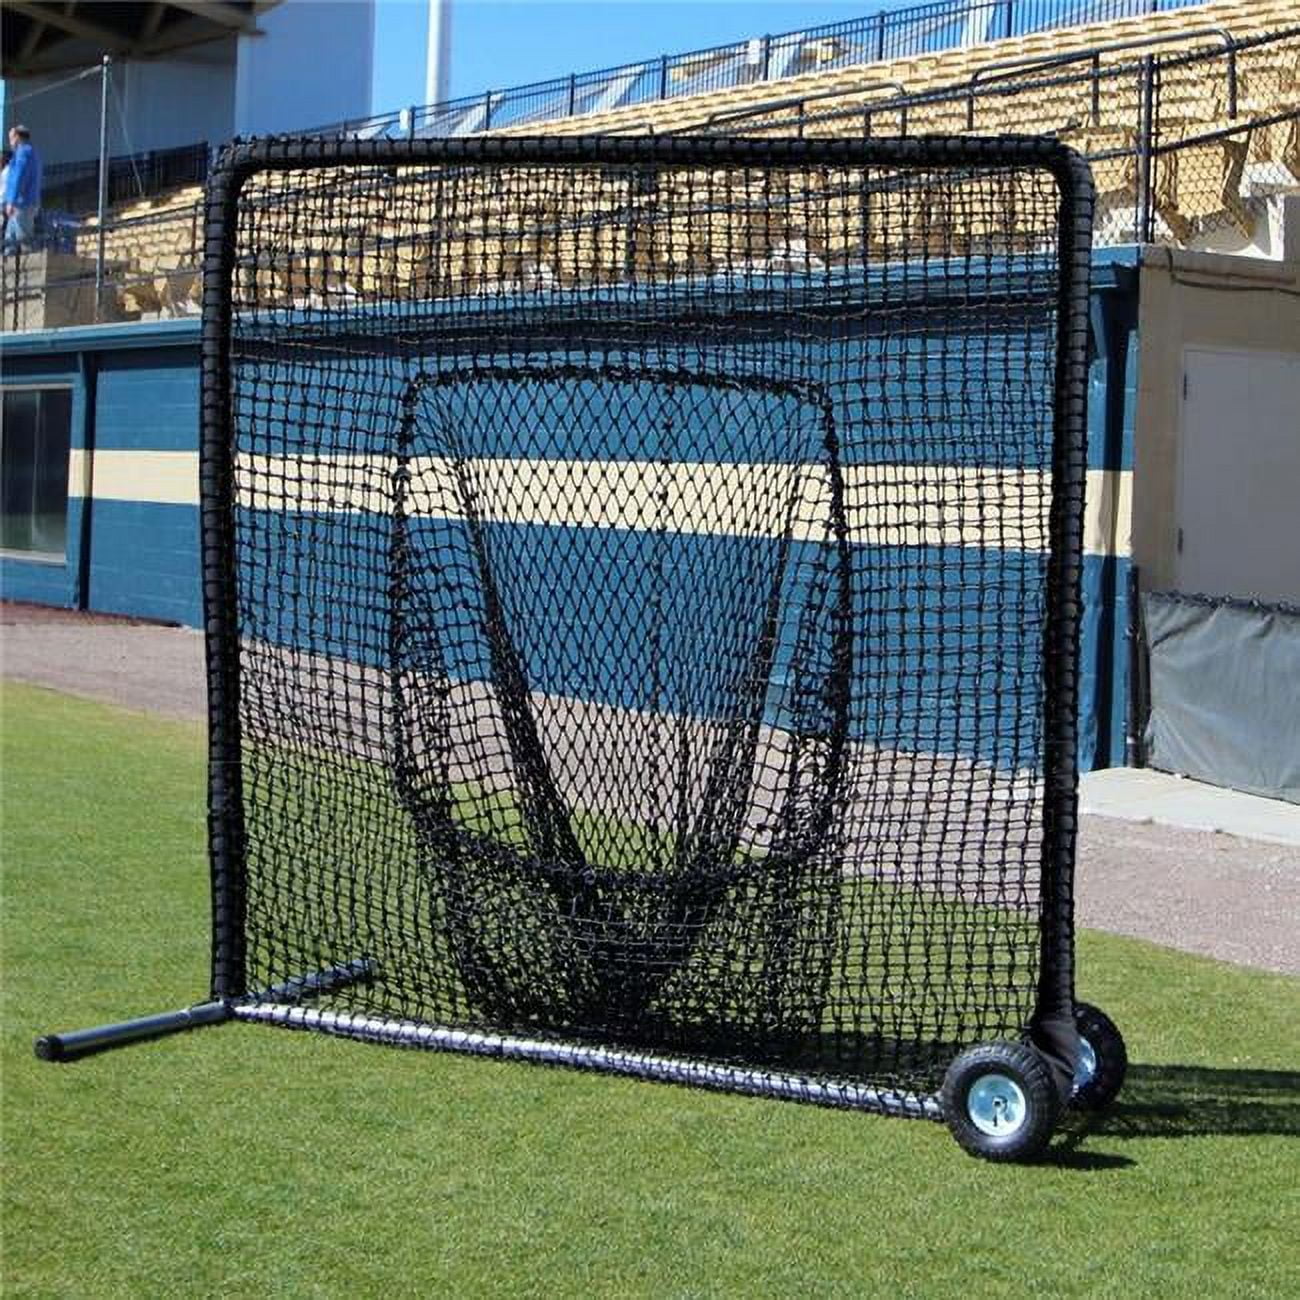 Picture of Cimarron Sports CMHW-7x784PSockNFWP 7 x 7 ft. No.84 Premier Sock Net & Frame with Wheels & Padding